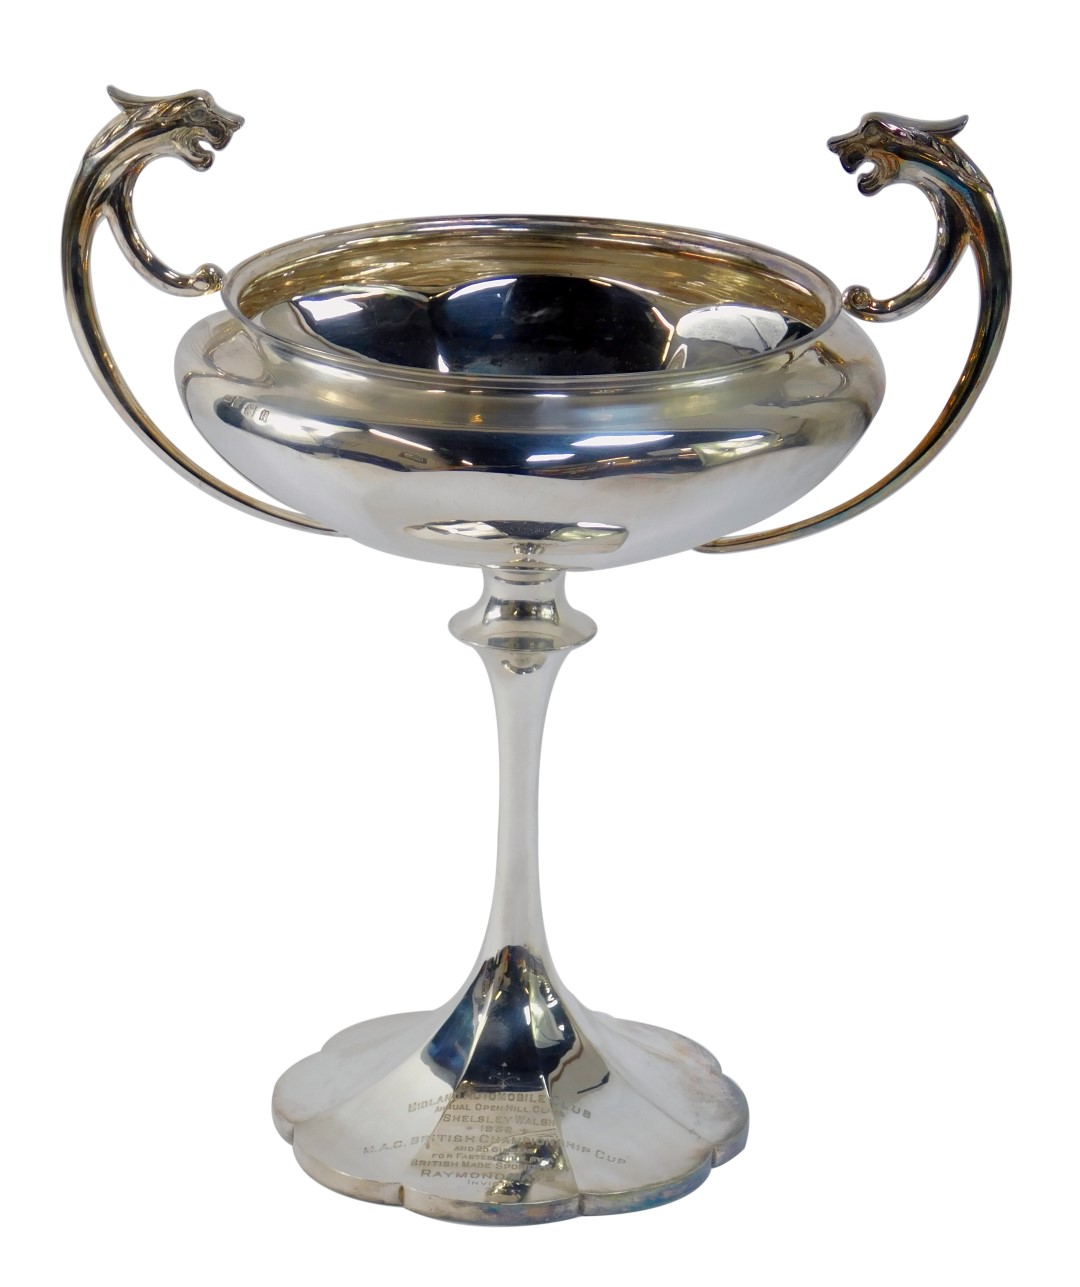 Motor Racing Interest. A George V silver two handled trophy awarded to Raymond Mays, the circular bo